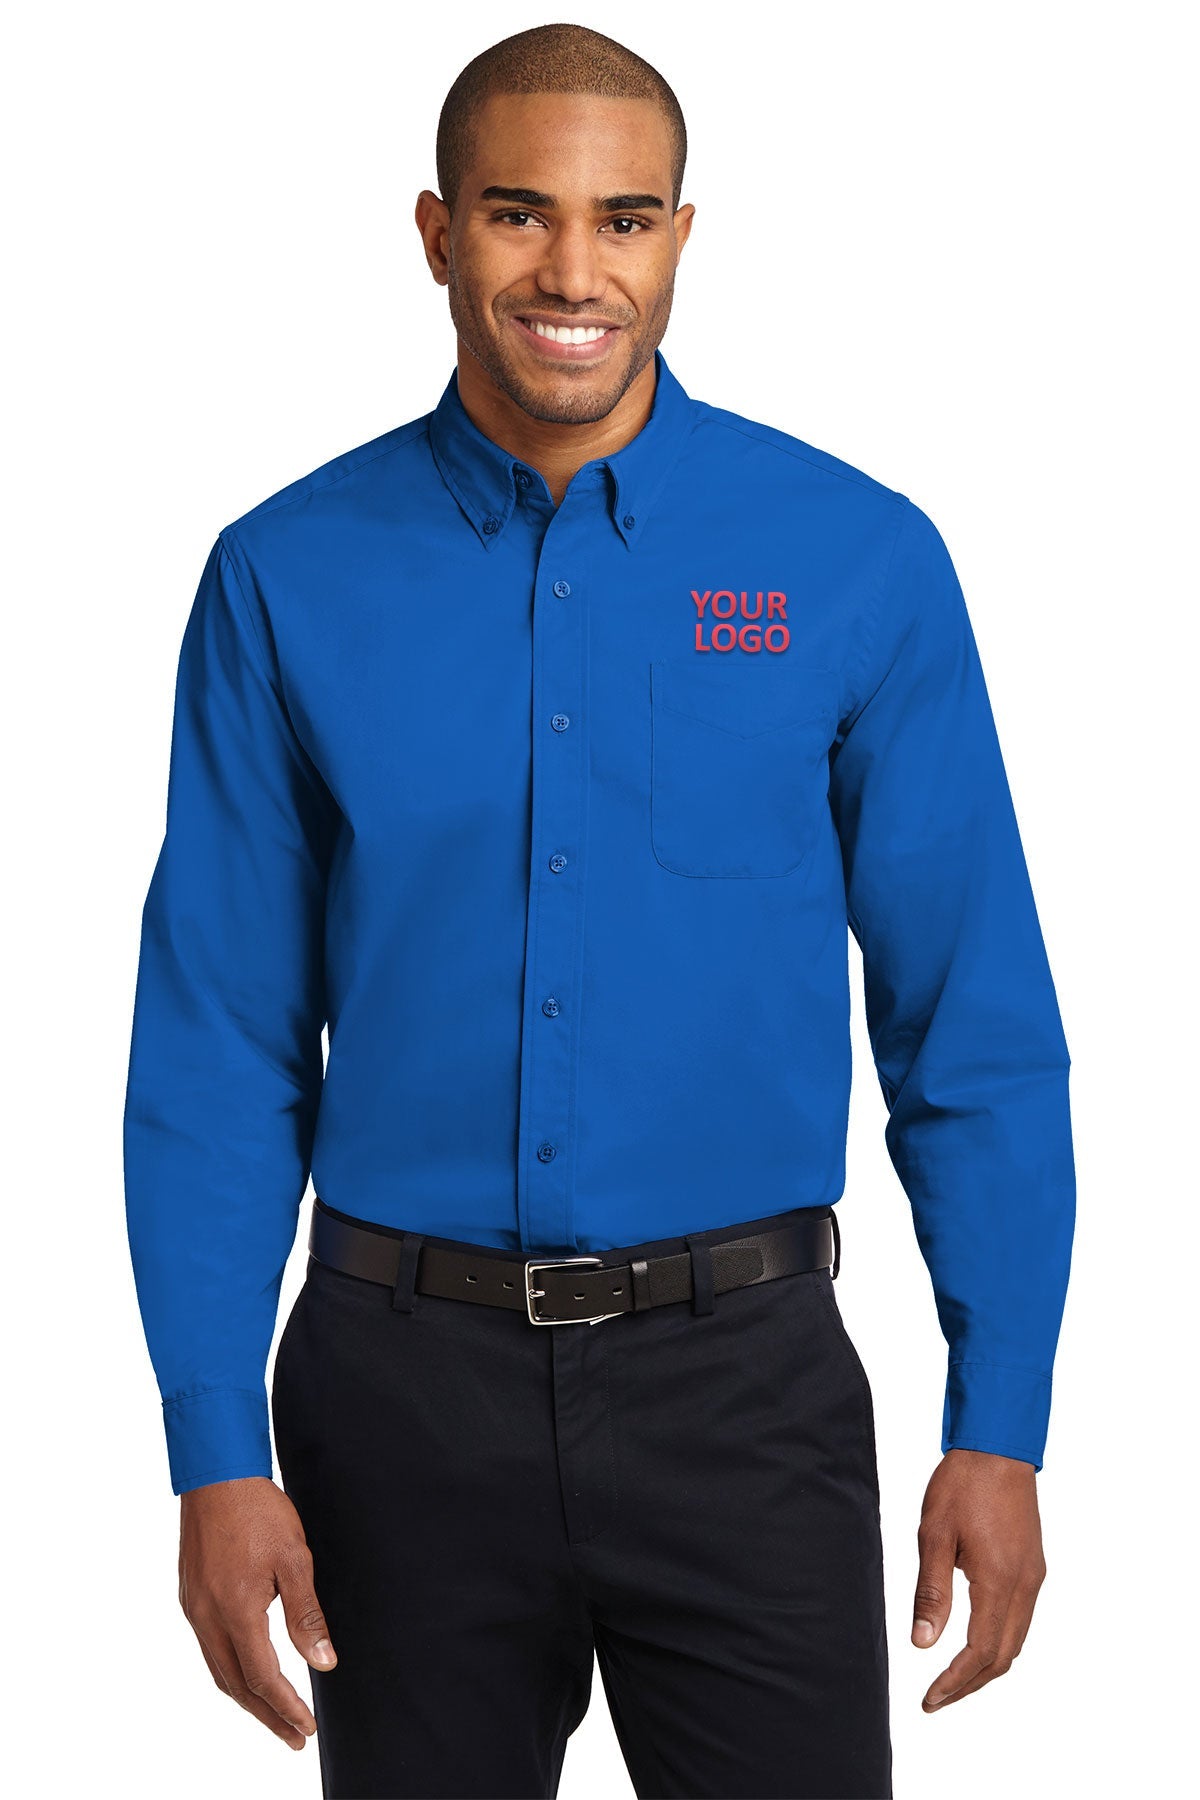 Port Authority Strong Blue S608 business shirts with company logo